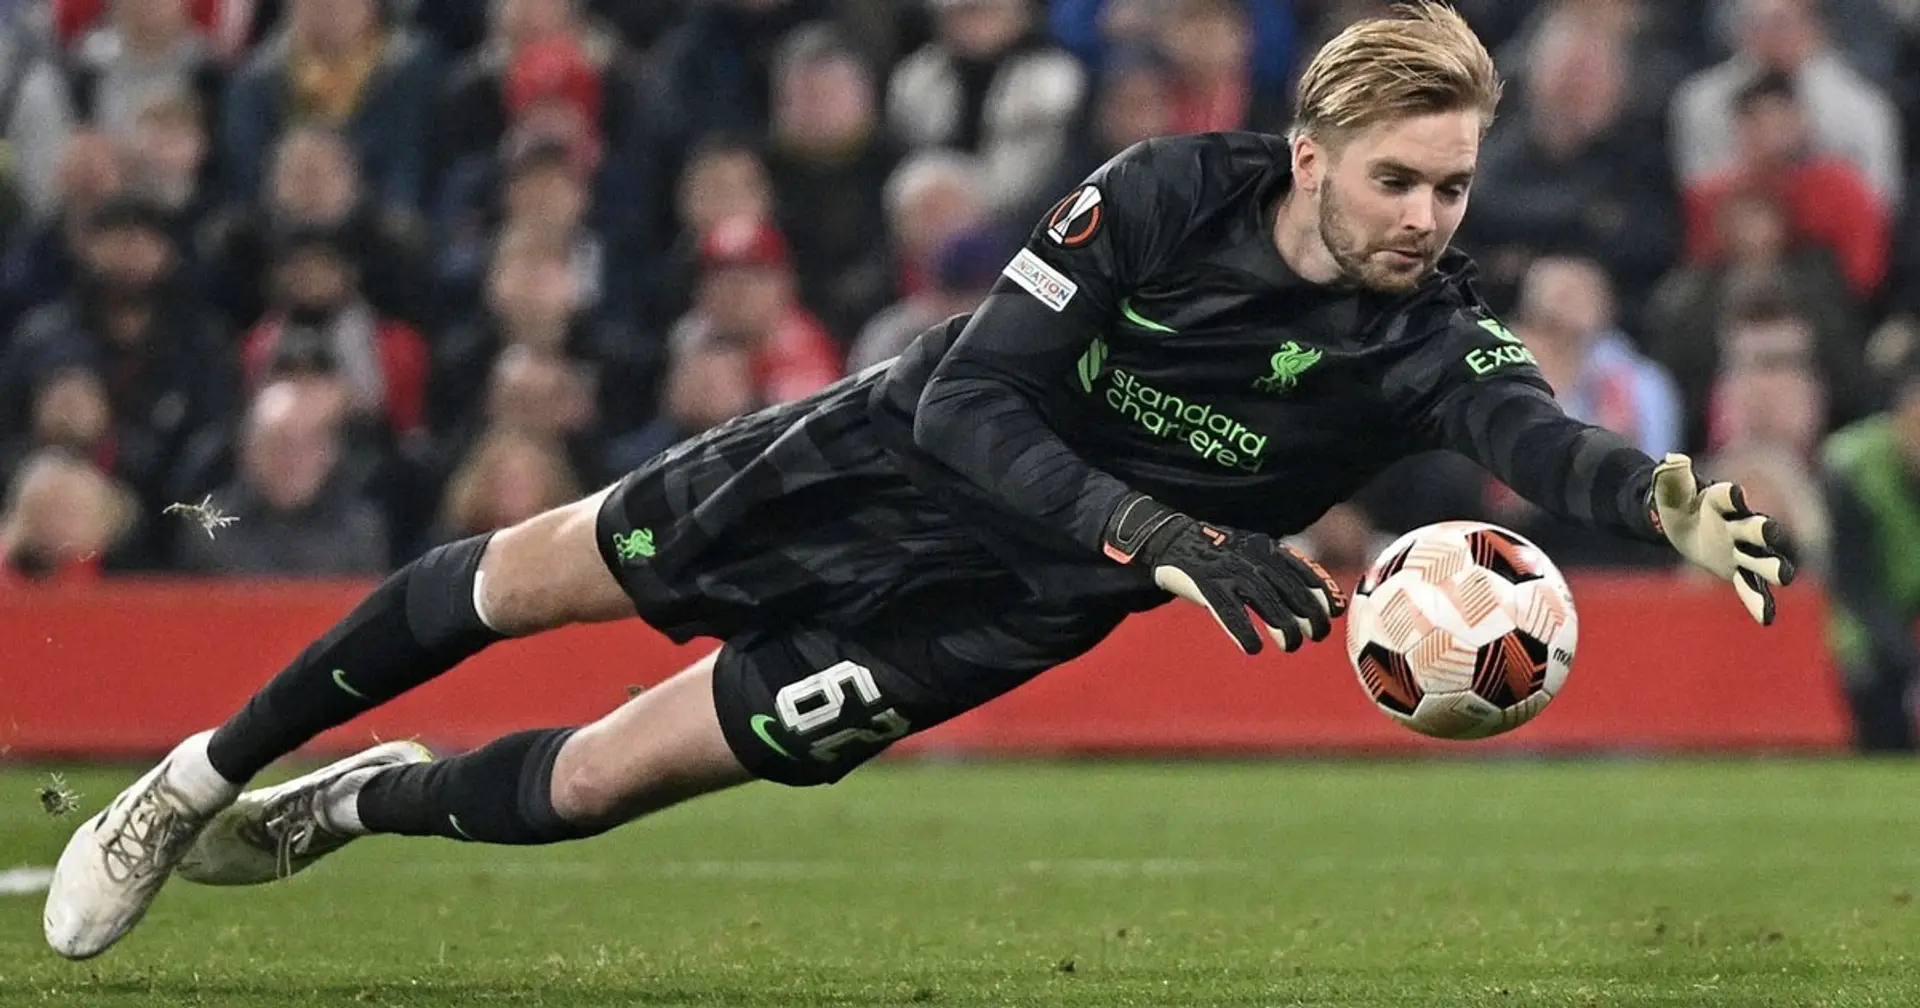 'He's a cheerleader': Fans name LFC player who could make Kelleher a better goalkeeper - not Alisson